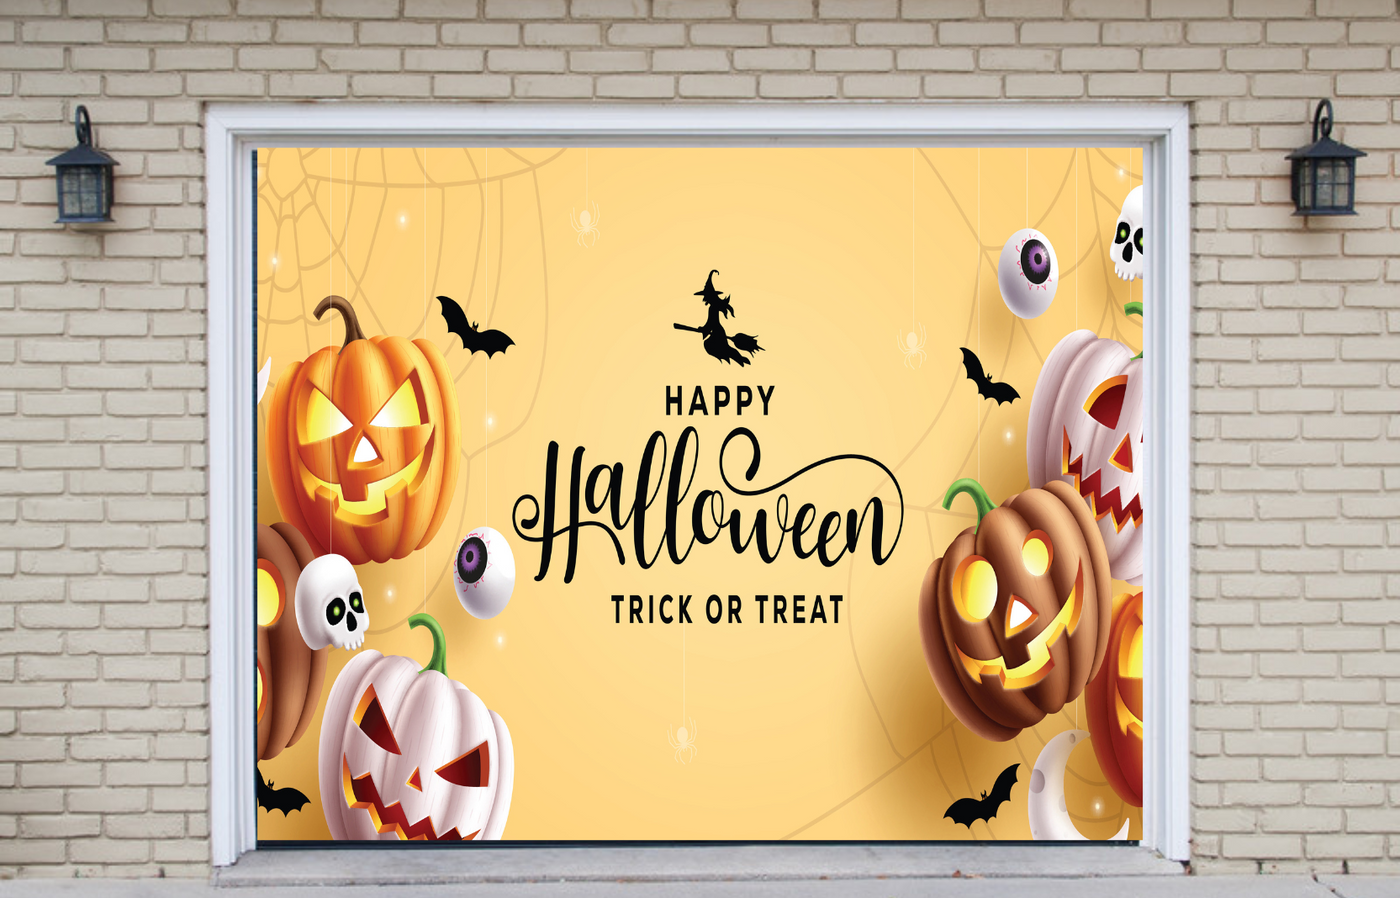 Halloween Trick Or Treat Holiday Celebration With Spooky Pumpkins Characters Garage Door Cover Wrap Decoration